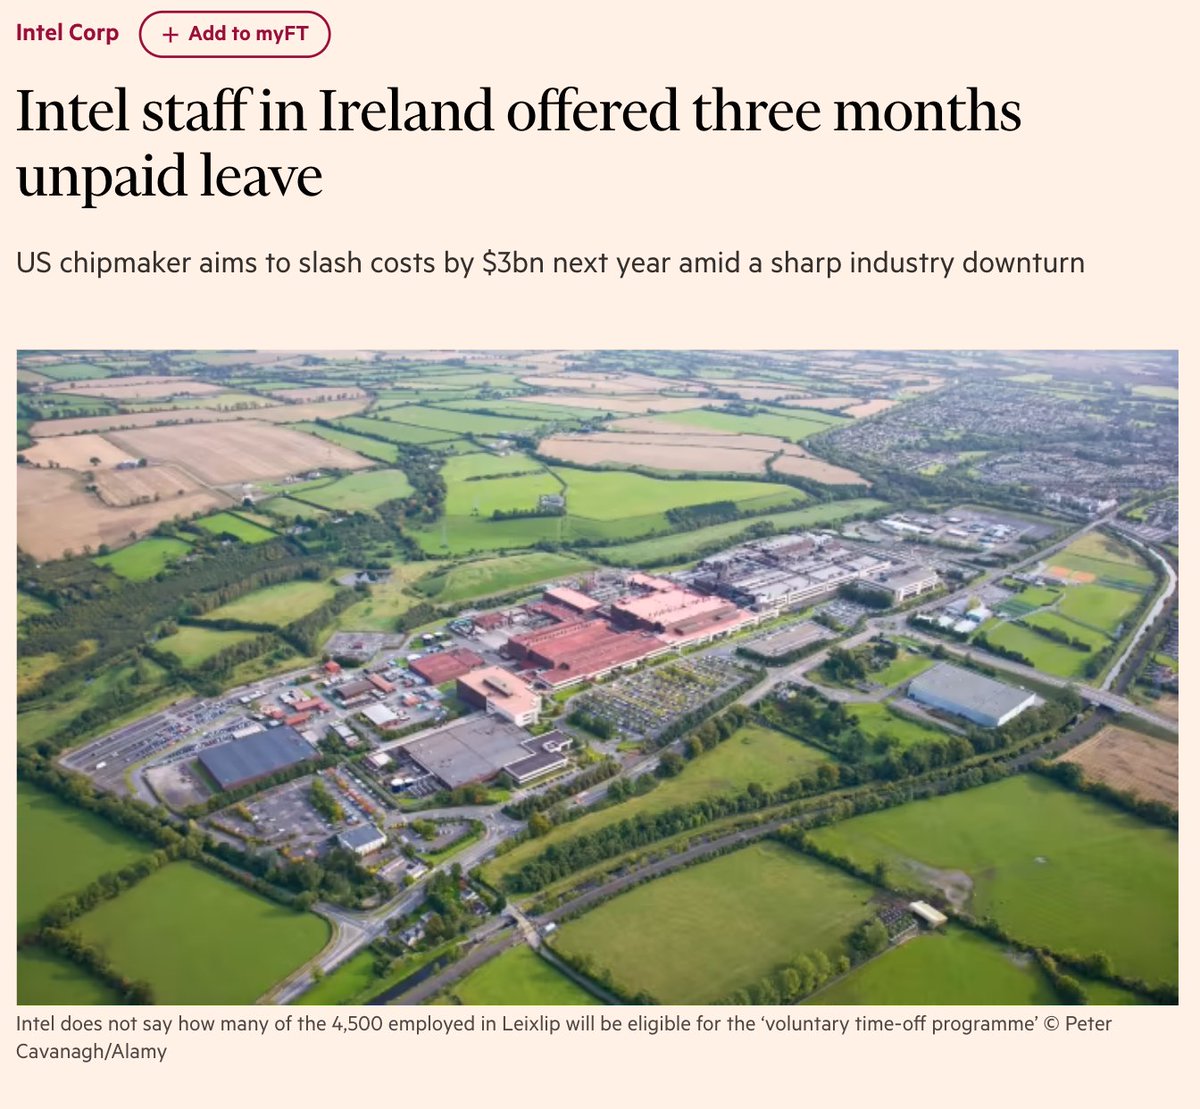 Intel is offering 000s of workers in Ireland 3 months unpaid leave as the chipmaker looks to cut costs by $3bn next year to counter a dramatic downturn in global industry. Yeah thats the same chip industry all the industrial policy money is going into! ft.com/content/e58714…